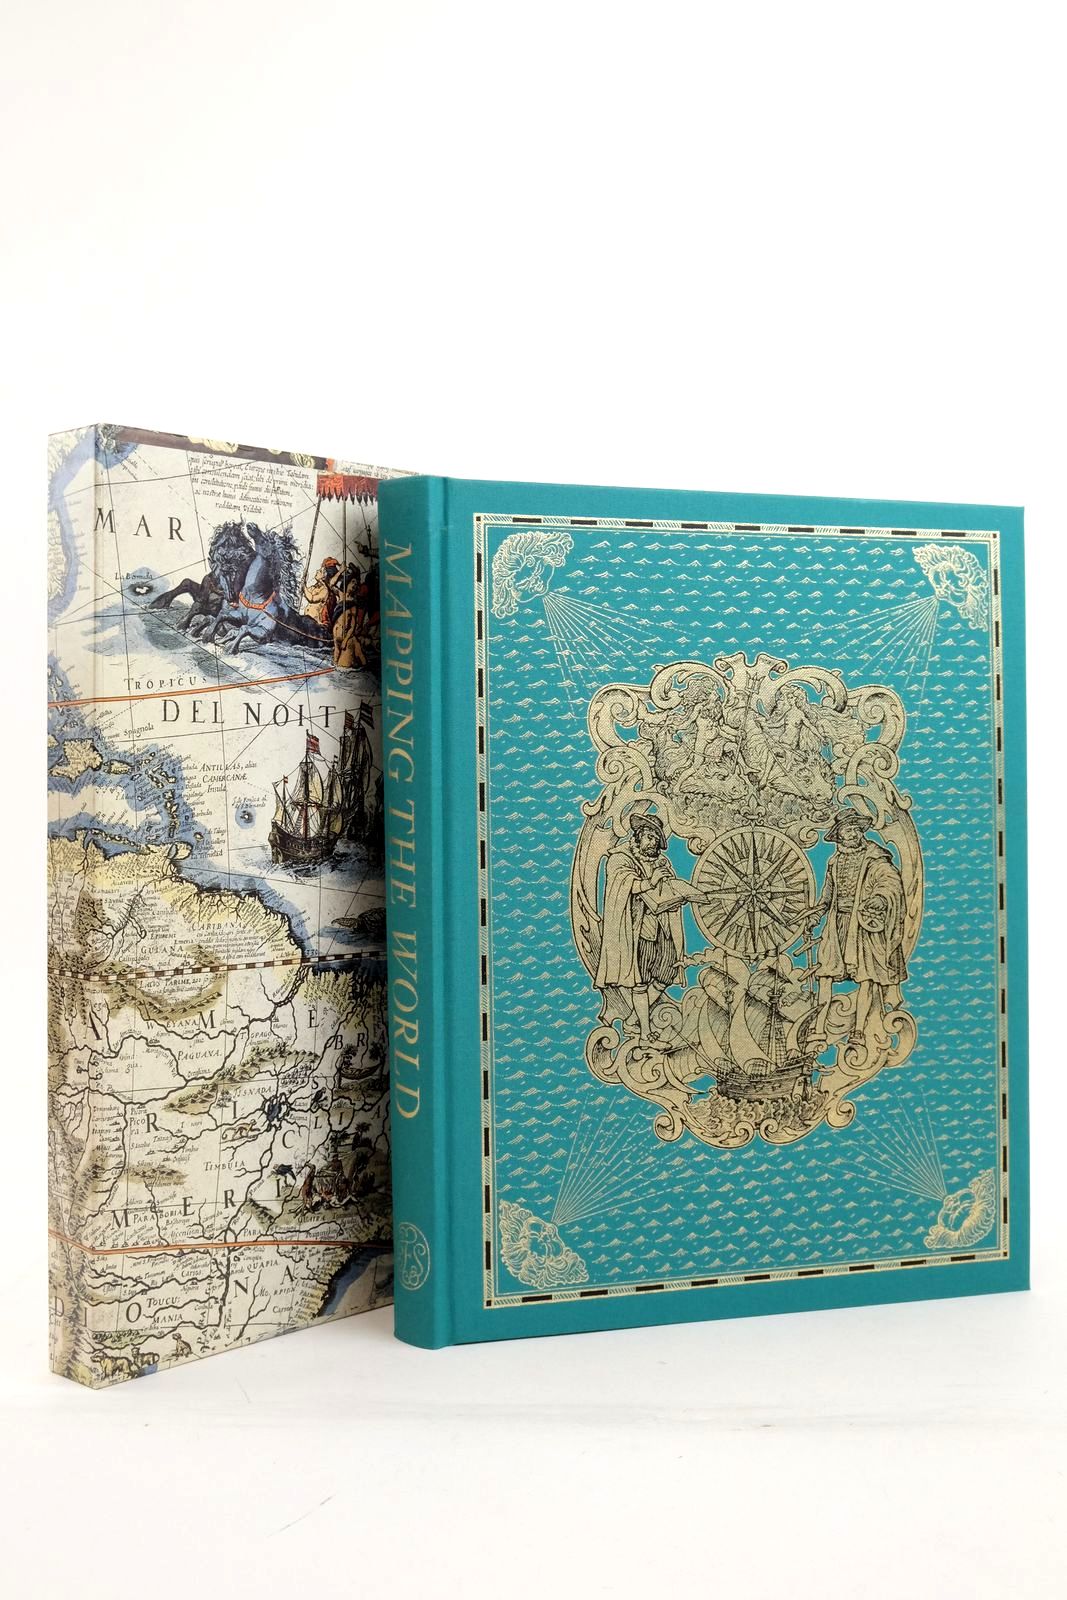 Photo of MAPPING THE WORLD written by Whitfield, Peter published by Folio Society (STOCK CODE: 2138258)  for sale by Stella & Rose's Books